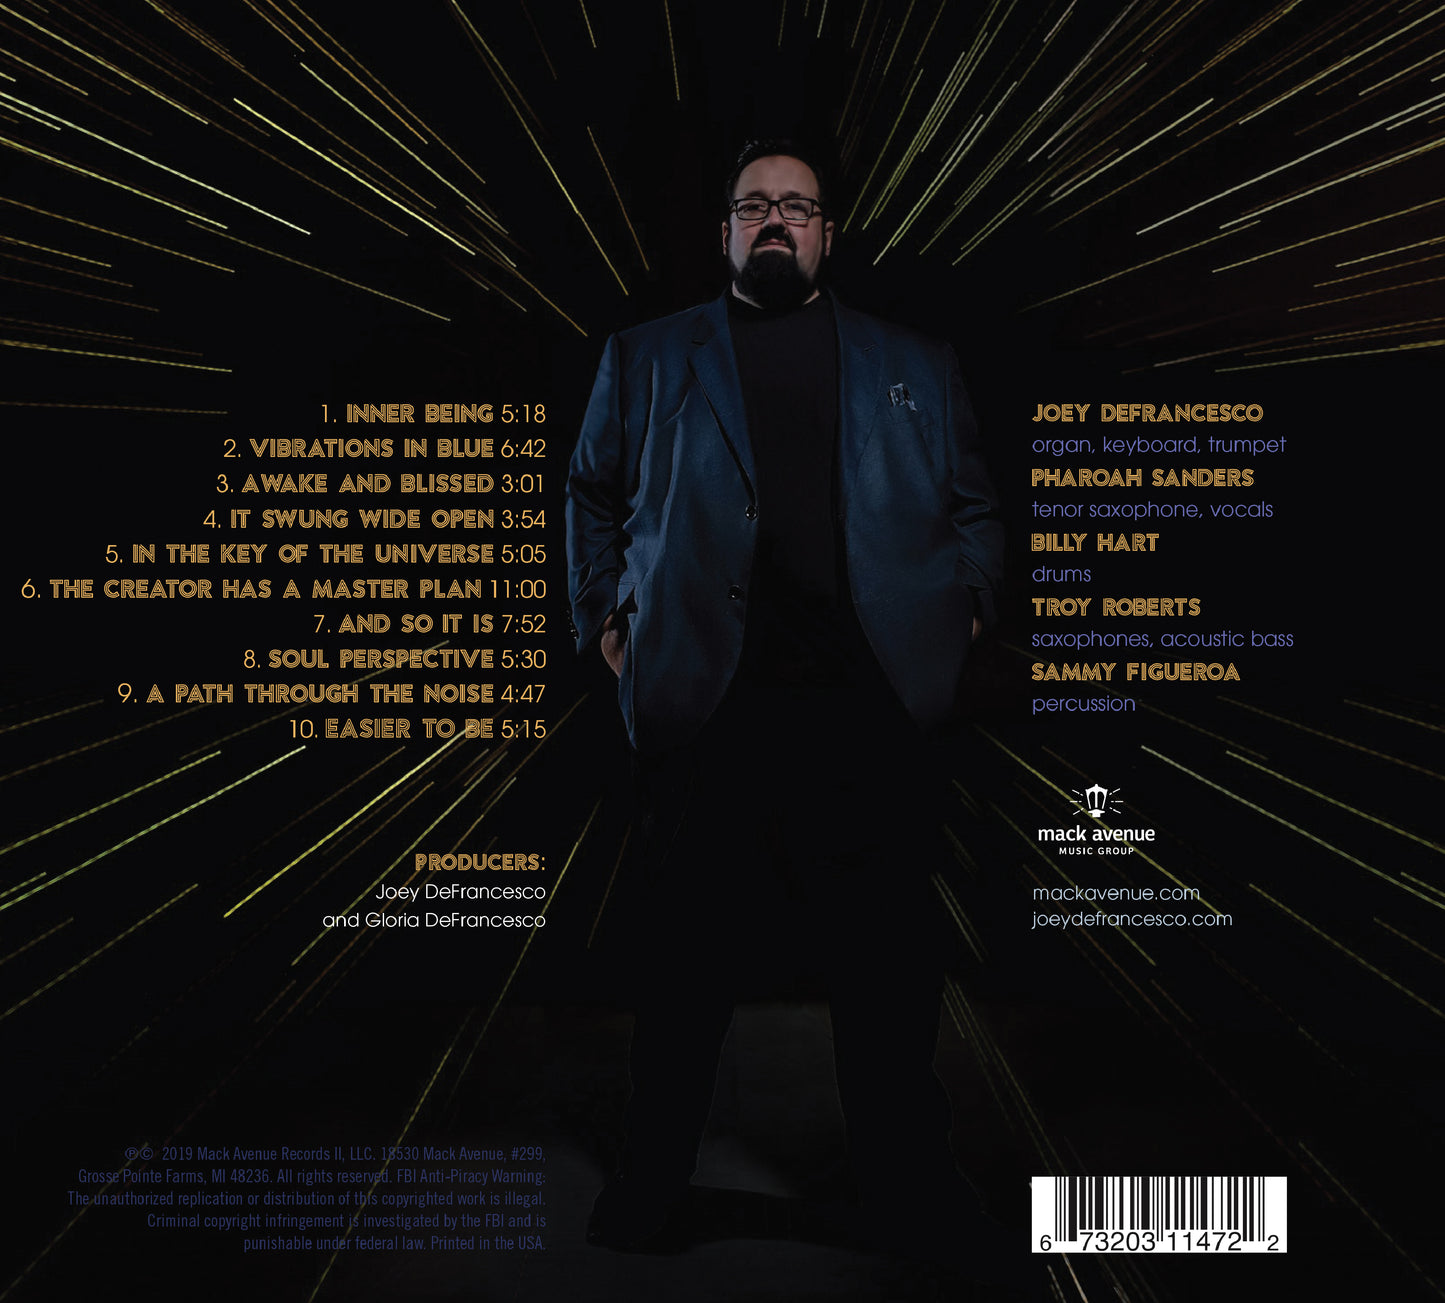 In The Key Of The Universe / Joey DeFrancesco